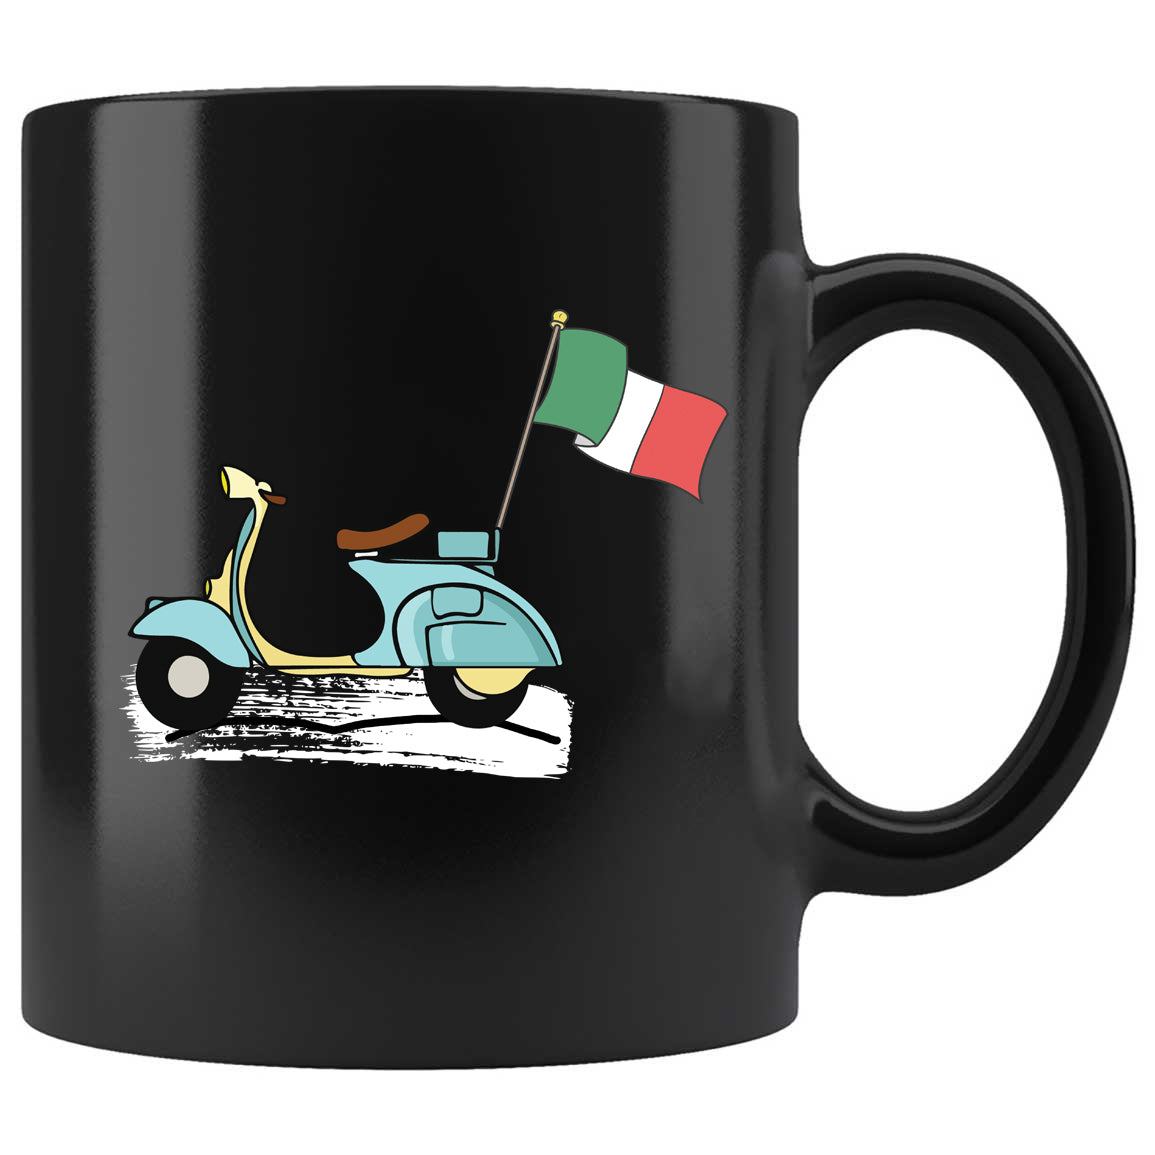 Italian Scooter Skitongifts Funny Ceramic Coffee Mug For Birthday, Mother's Day, Father's Day, Christmas